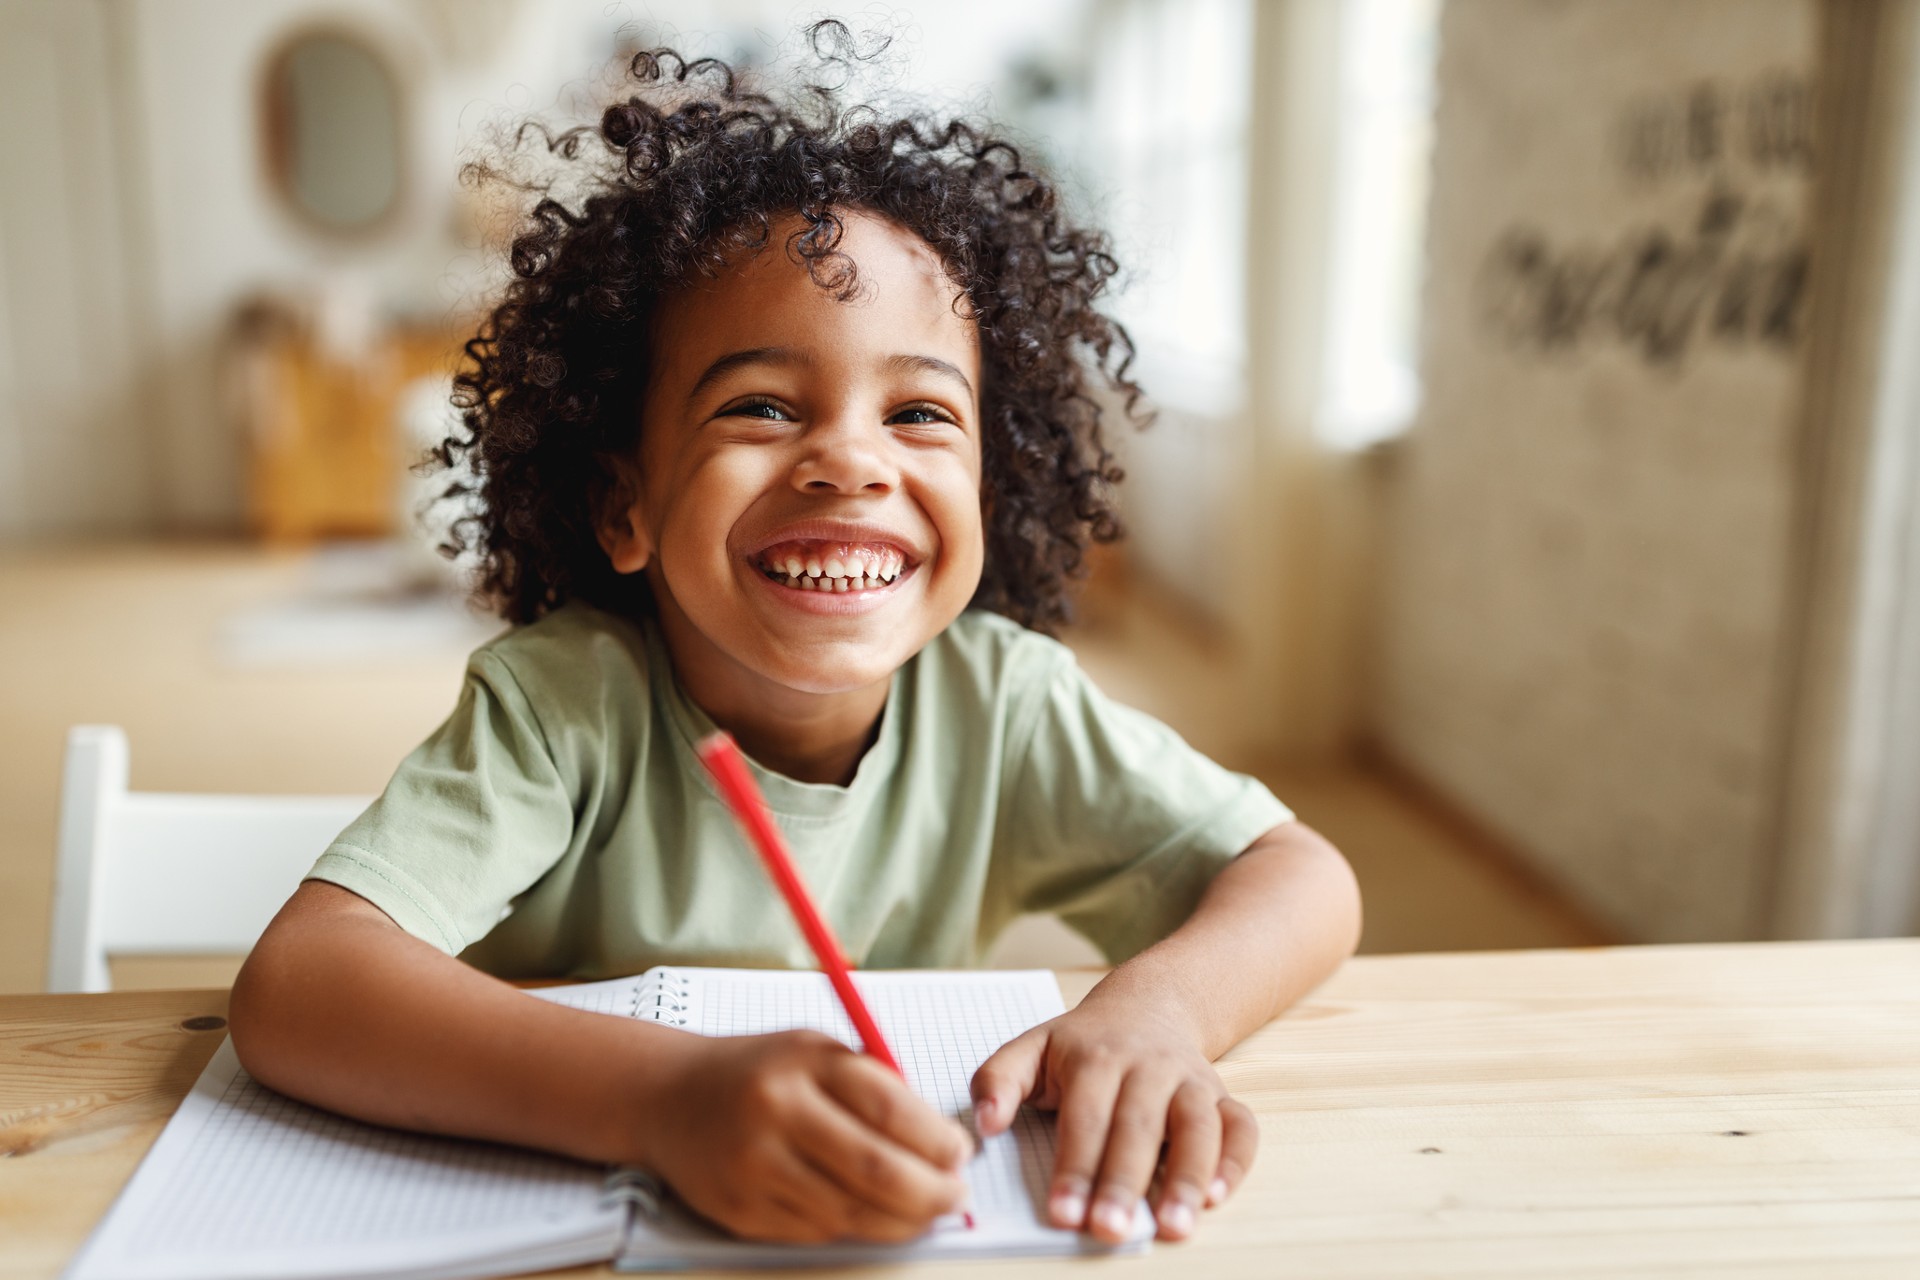 Child with a pen and paper looking happy to practice writing